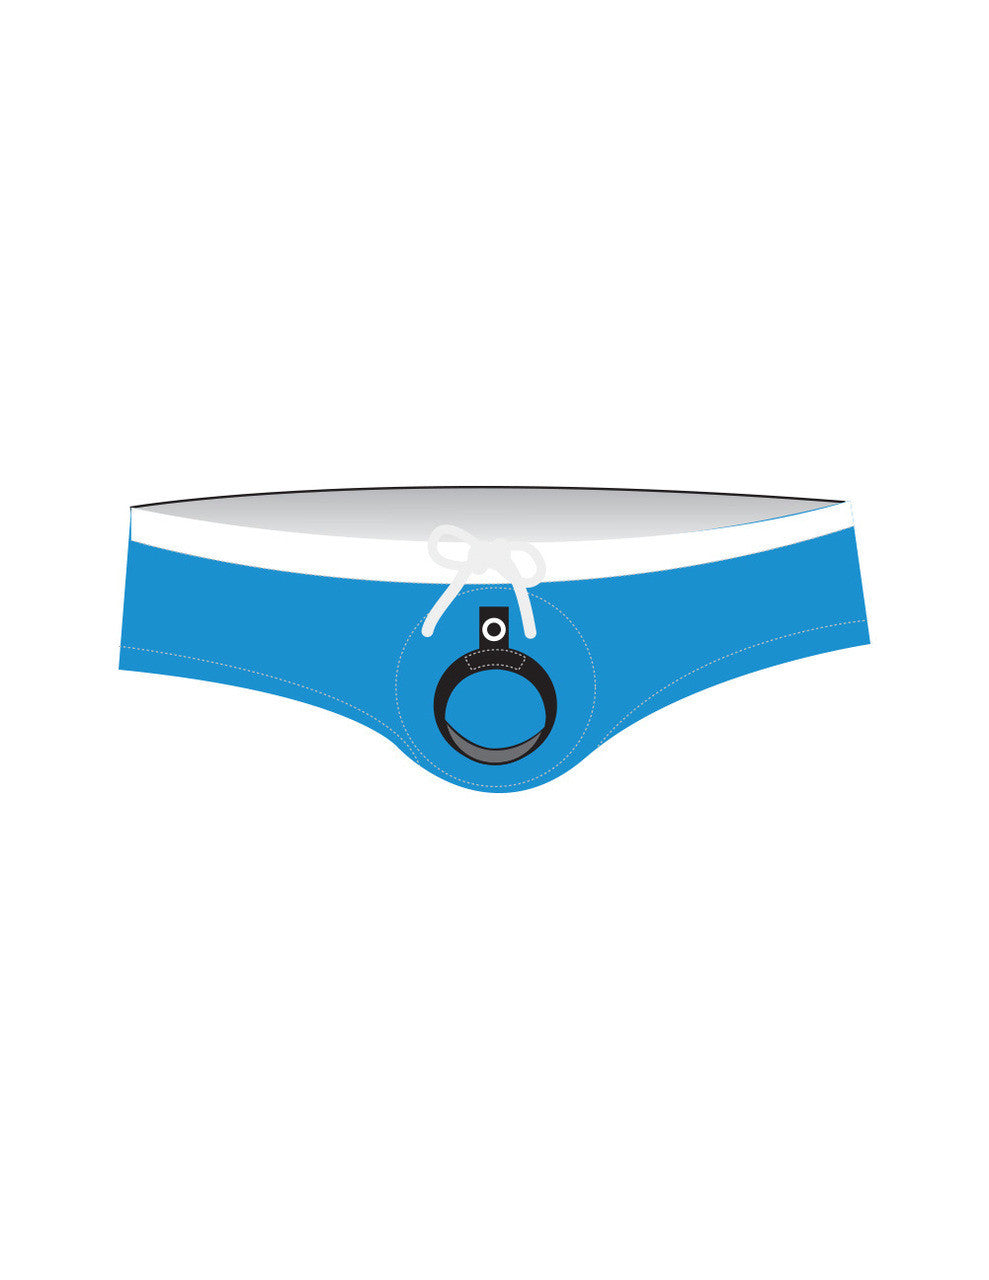 WildmanT Banned Swim w/Ball Lifter® Cock-Ring Teal - DealByEthan.gay